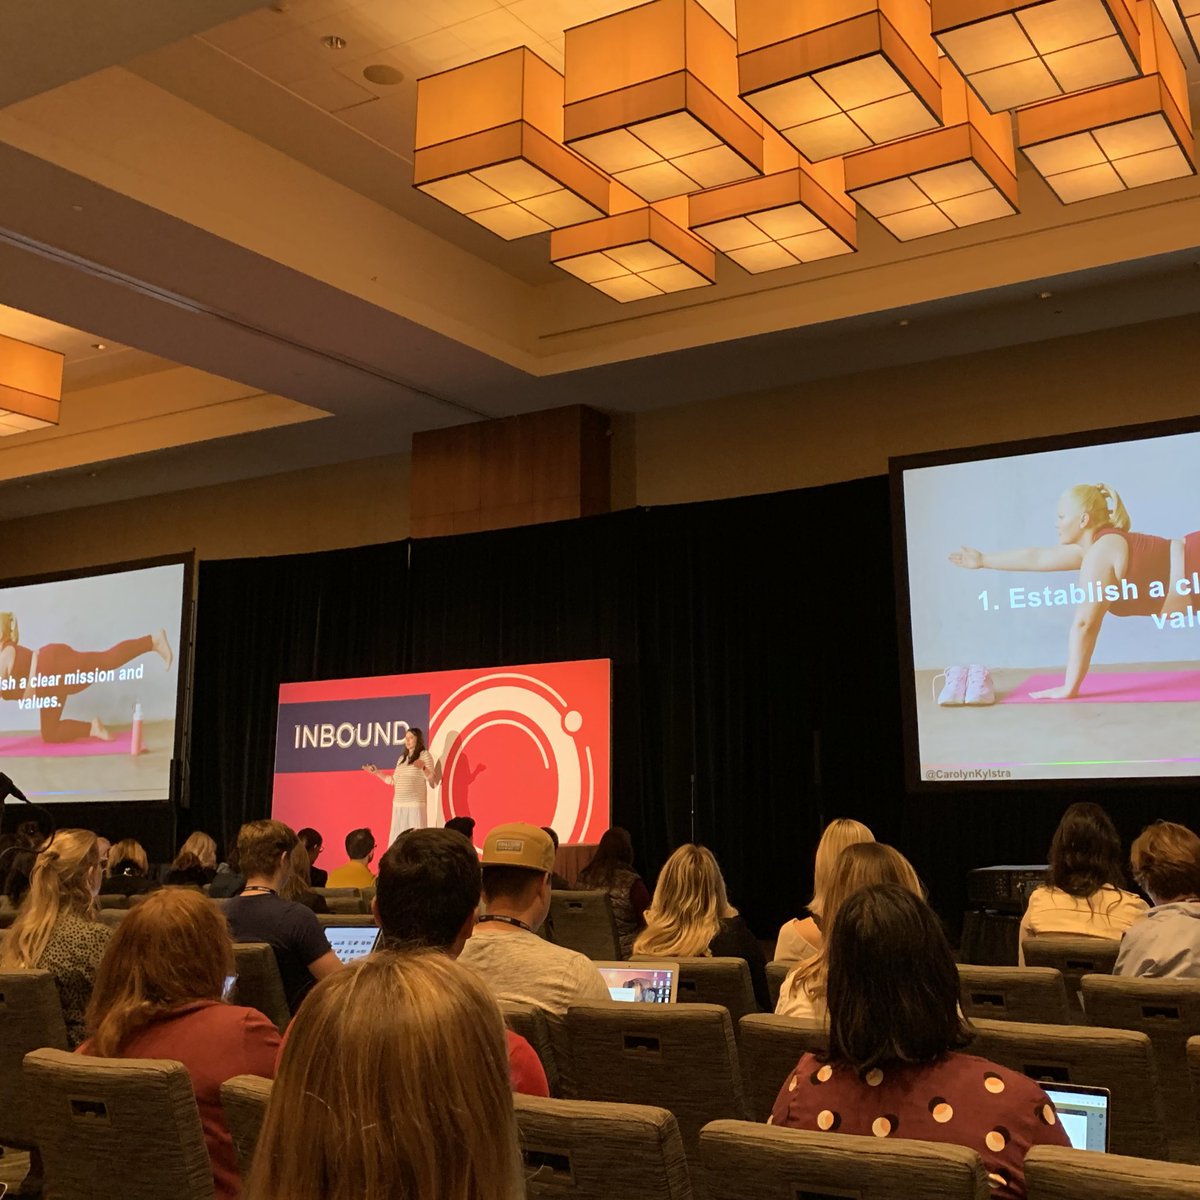 Talking about building #BrandCredibility with the Editor in Chief of @SELFmagazine, @CarolynKylstra!

“You are a stronger brand when your content creators come from diverse backgrounds and bring diverse experiences.” #INBOUND19